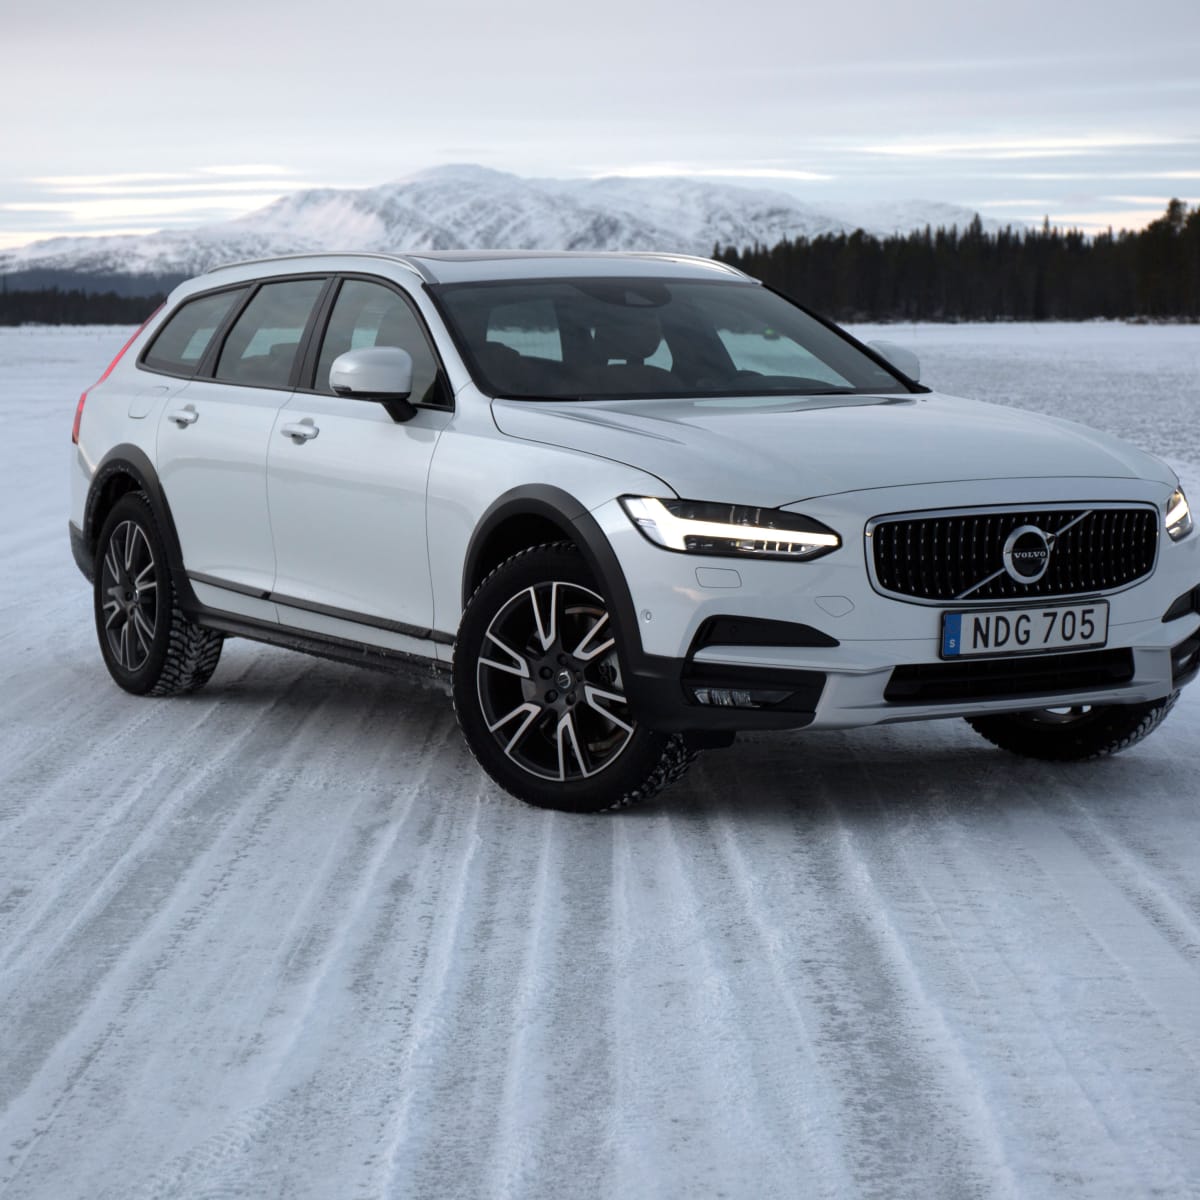 First Drive: The 2017 Volvo V90 Cross Country Is a Stylish, All-Terrain  Wagon - Men's Journal